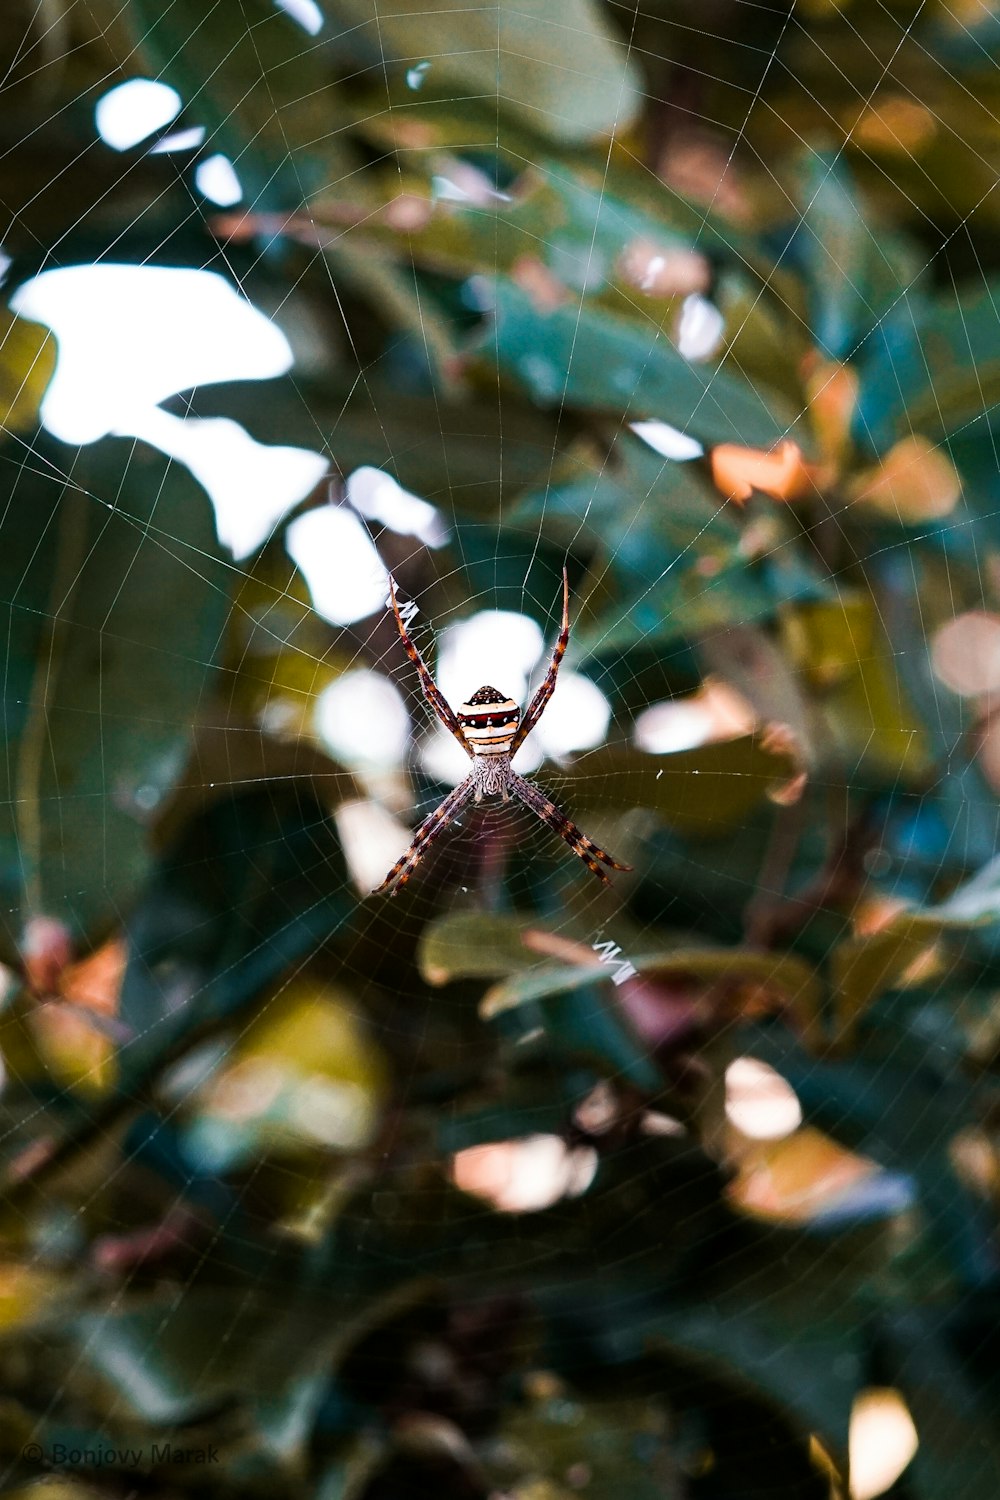 white and black spider on spider web in close up photography during daytime